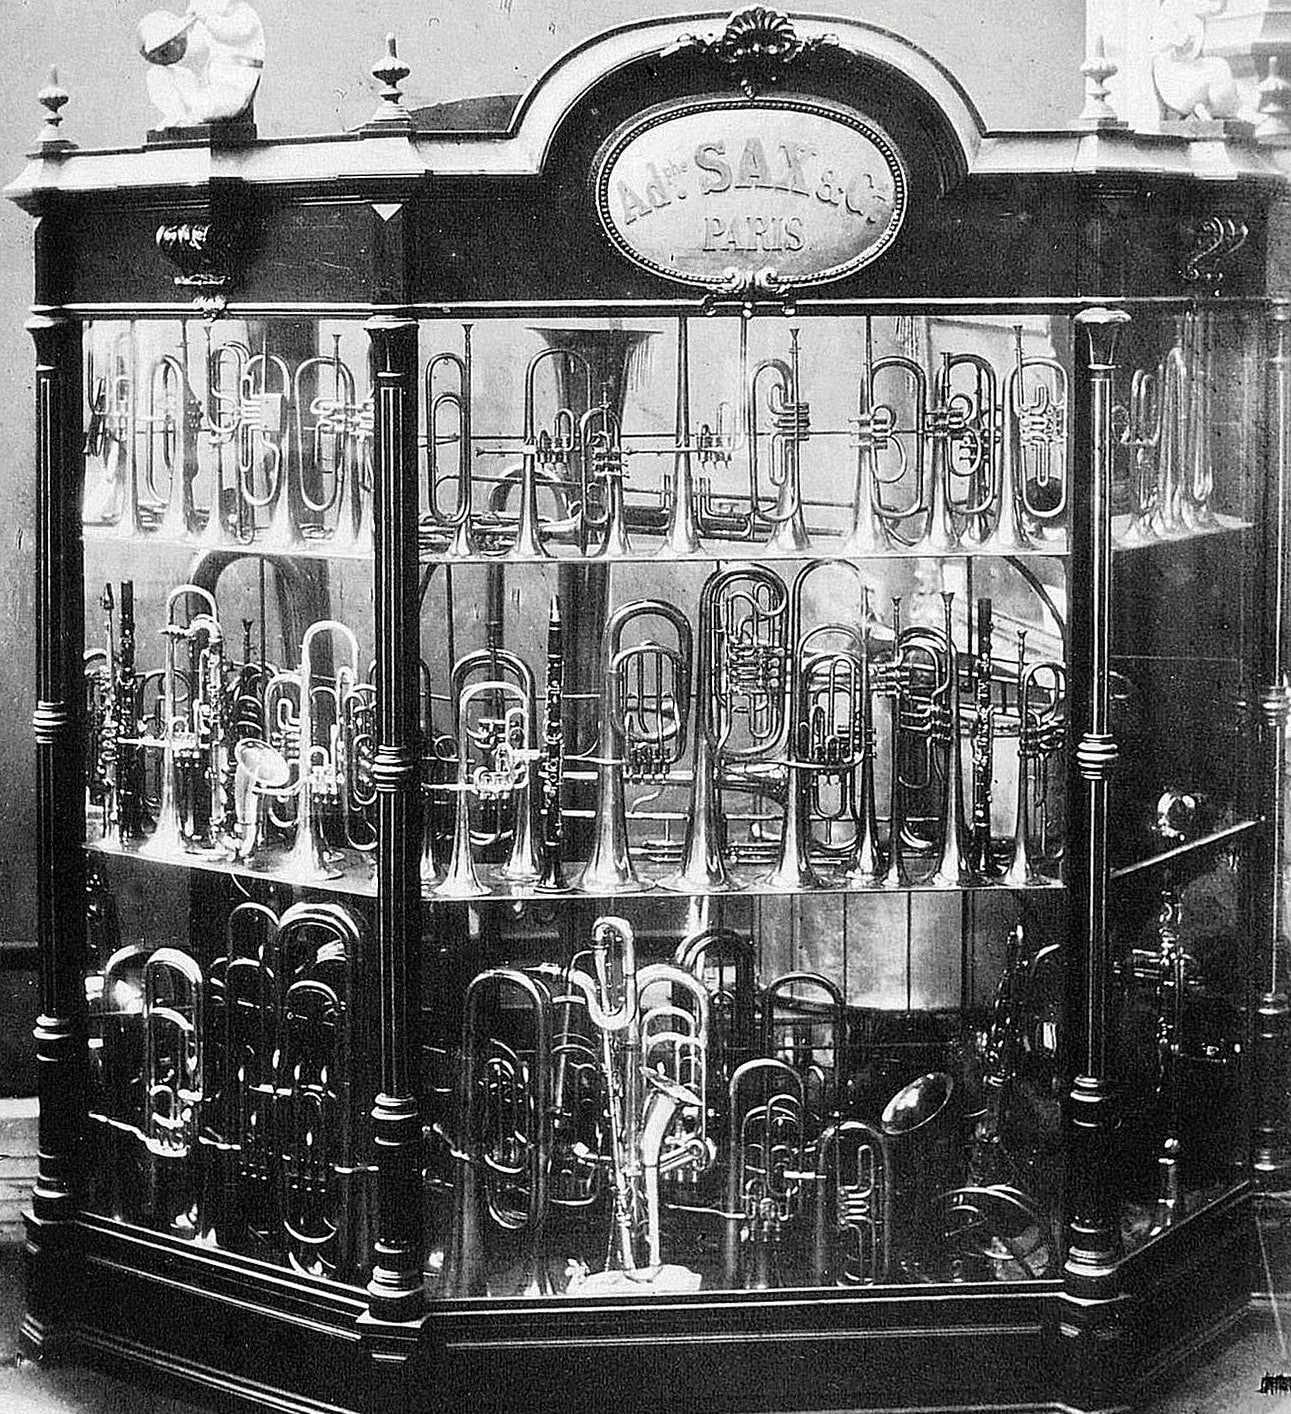 Adolphe Sax and Co., display case of brass instruments, with a saxophone lower front centre, Great Exhibition, London 1851